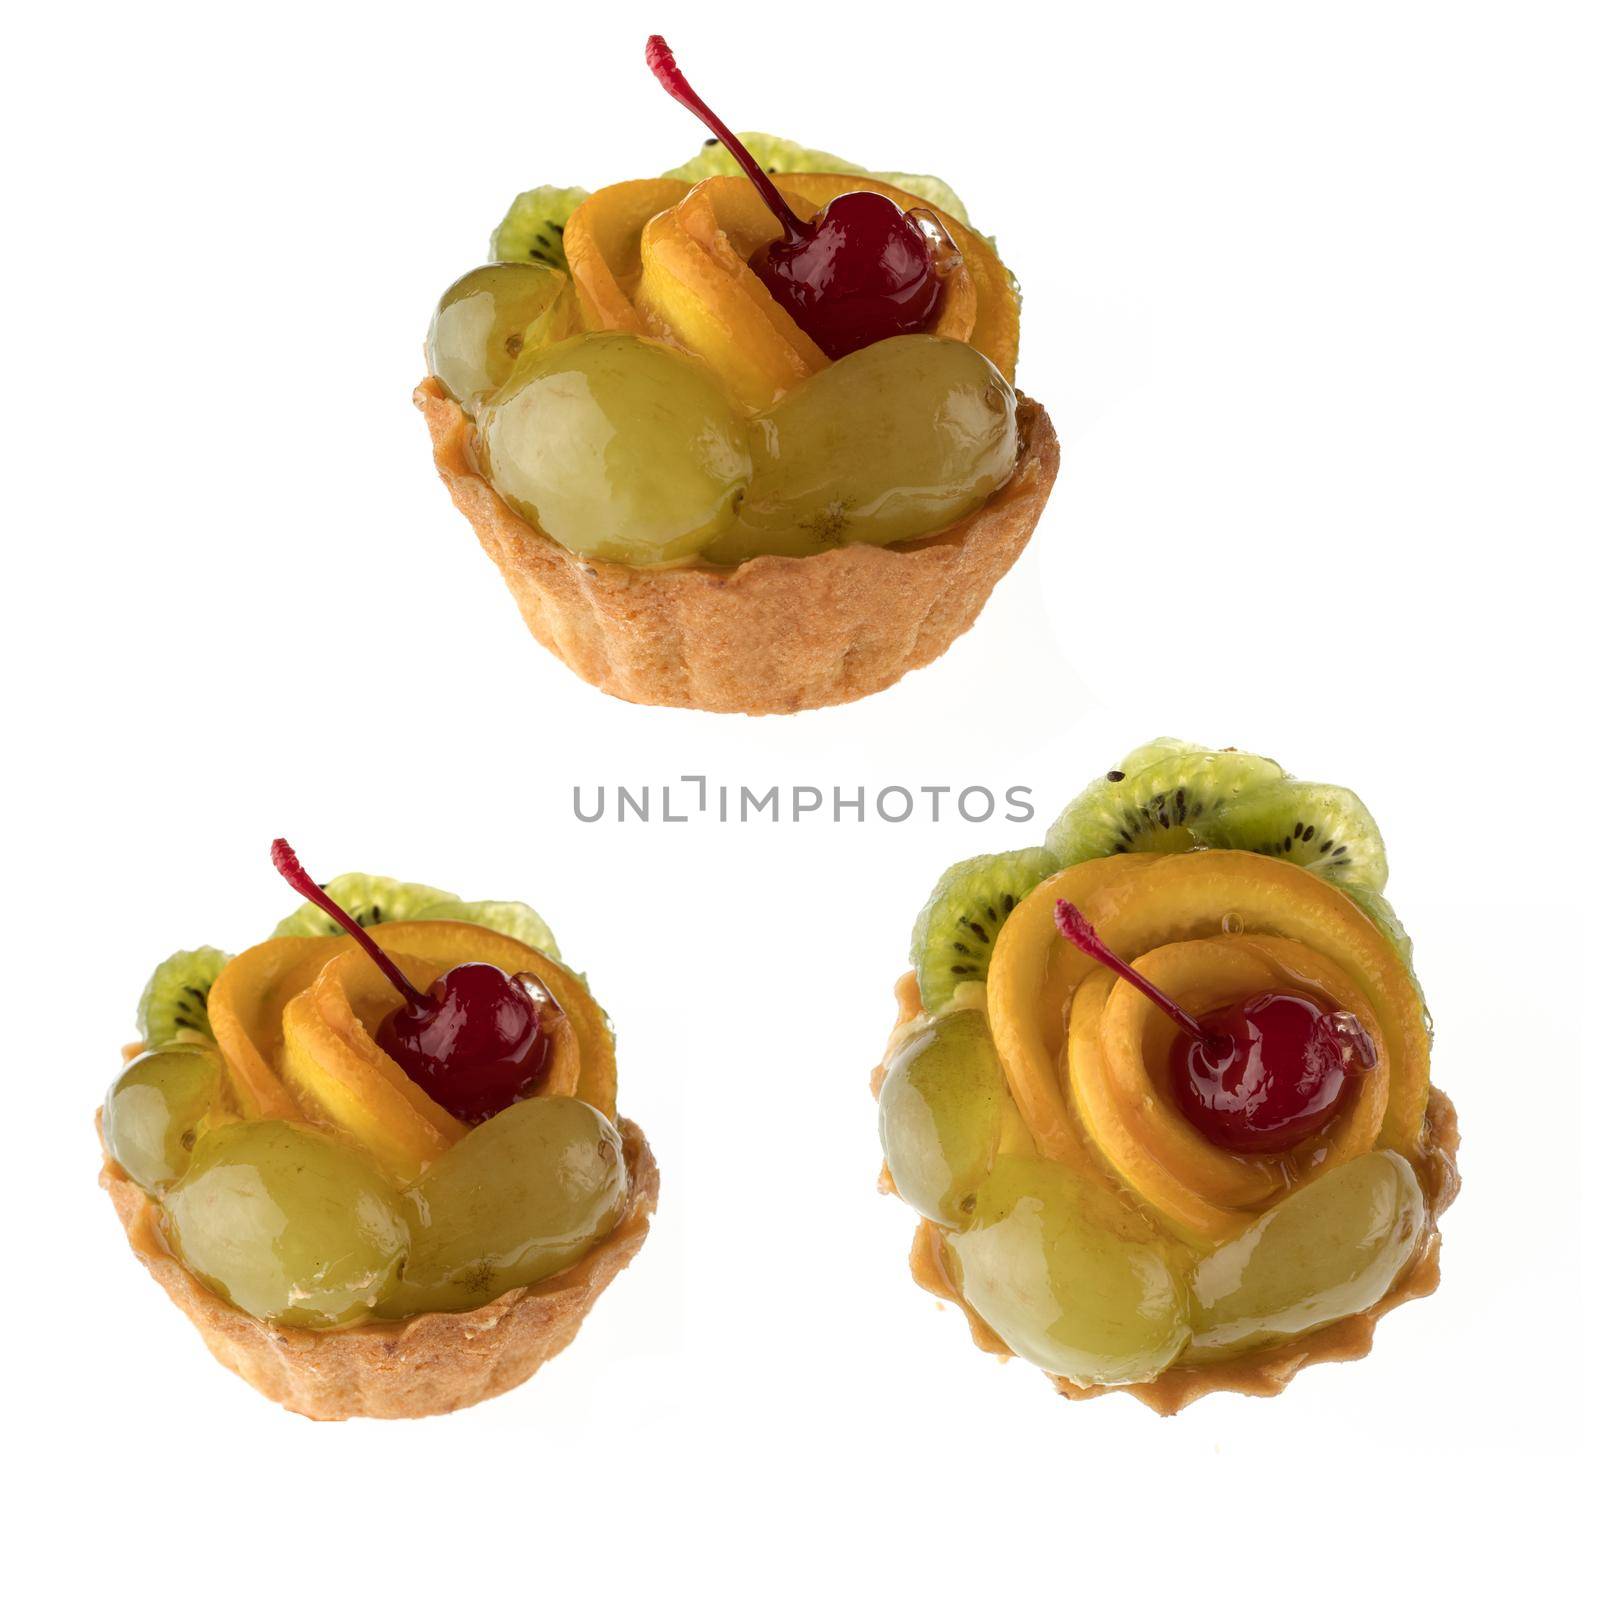 Dessert, fruit cake, with cherry grapes and orange slices, on a white background in isolation, collage